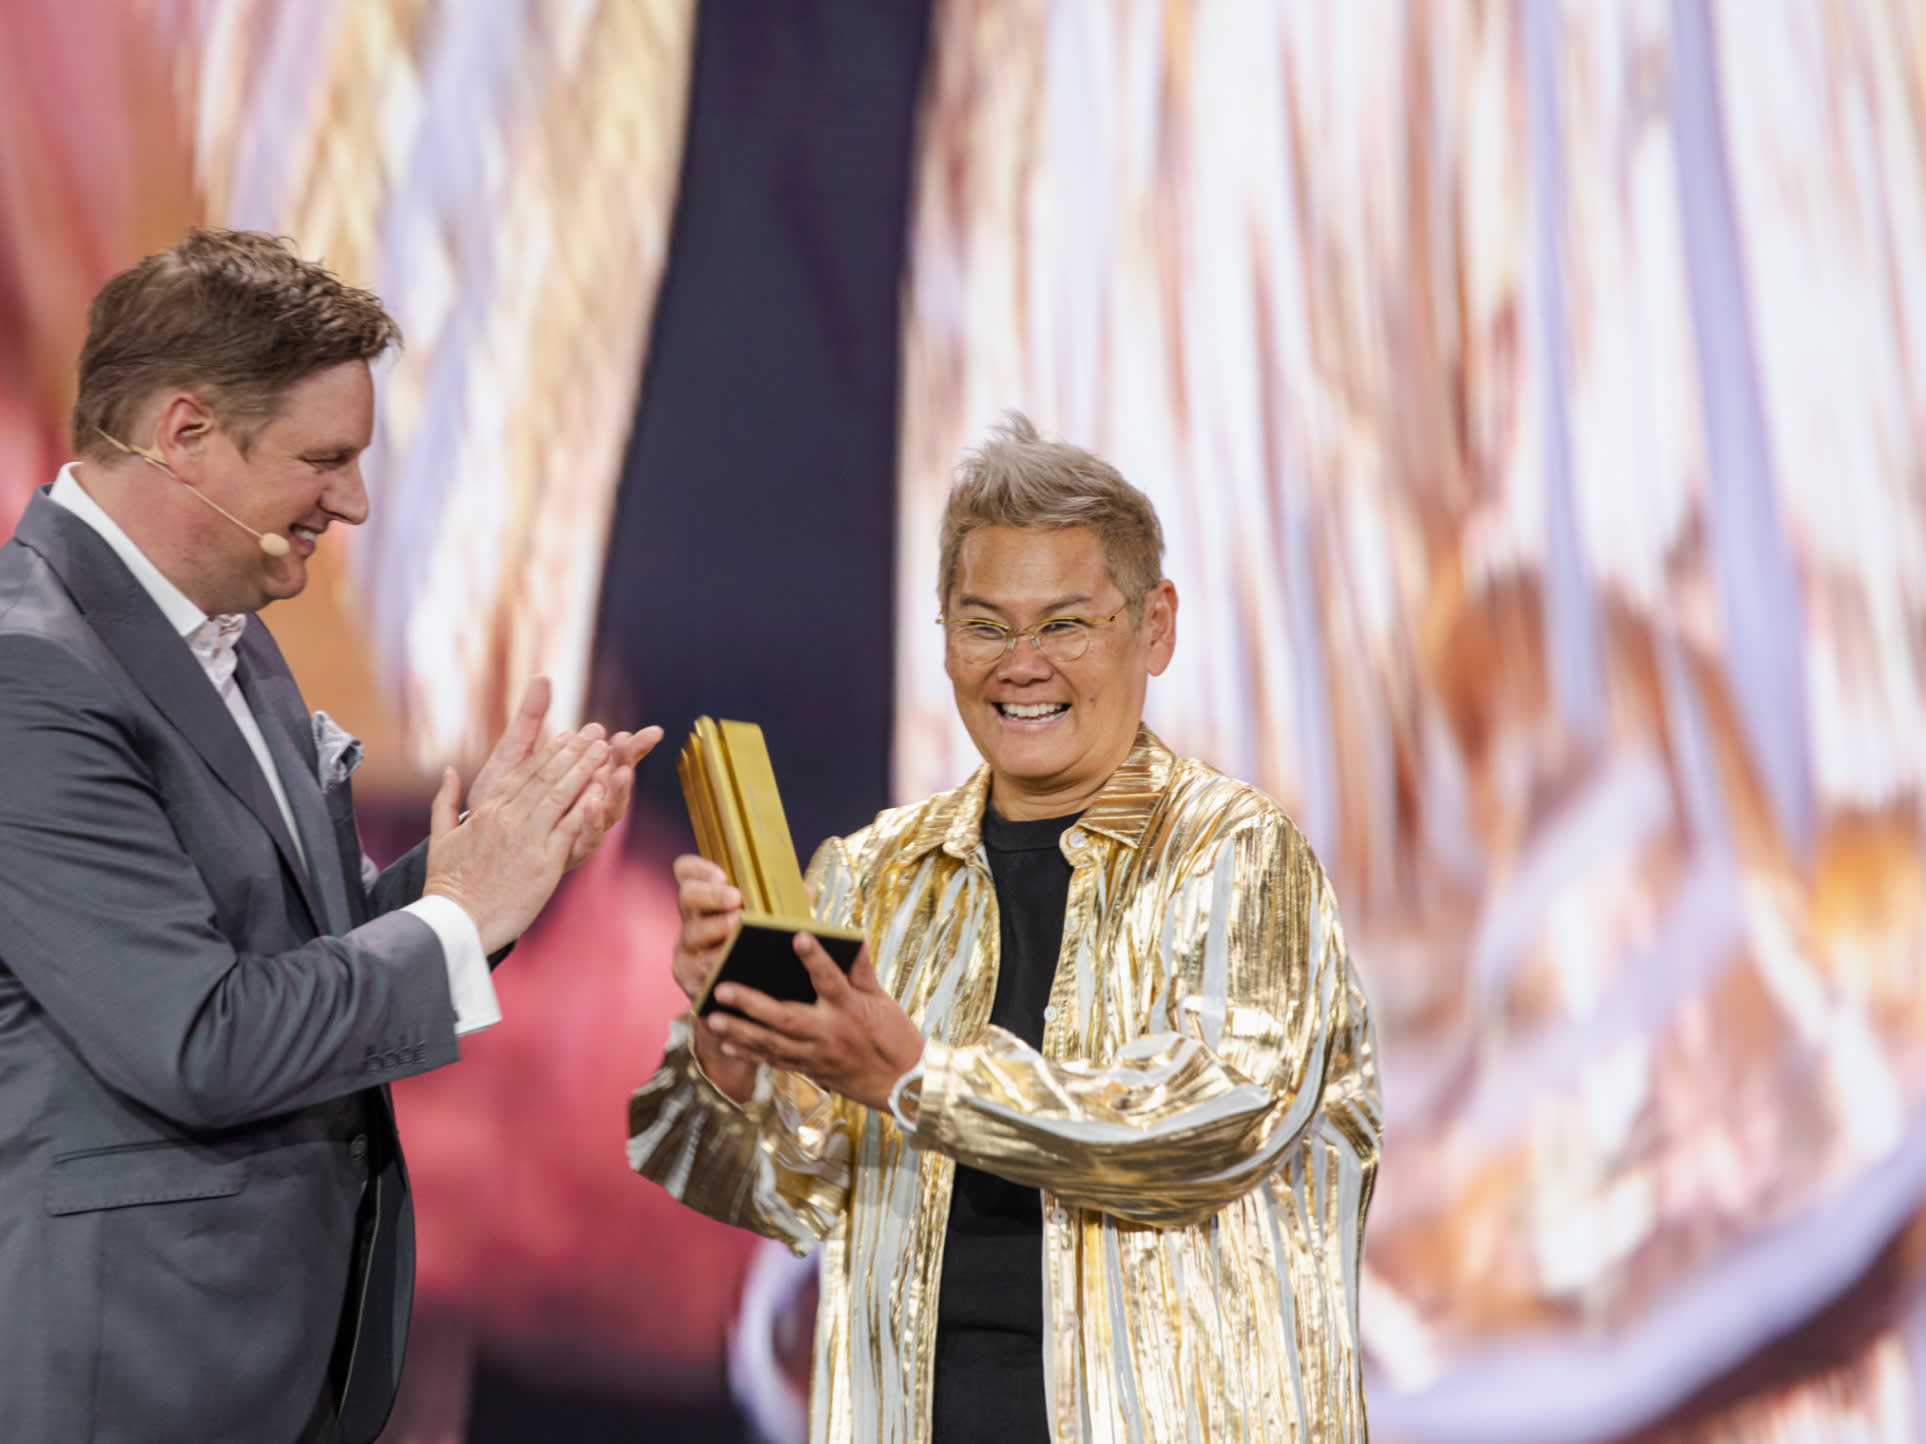 iF DESIGN AWARD NIGHT: Uwe Cremering handing over an iF DESIGN AWARD Gold to Caroline Cheng for YiBrick - a permeable brick made of more than 90% recycled ceramic.